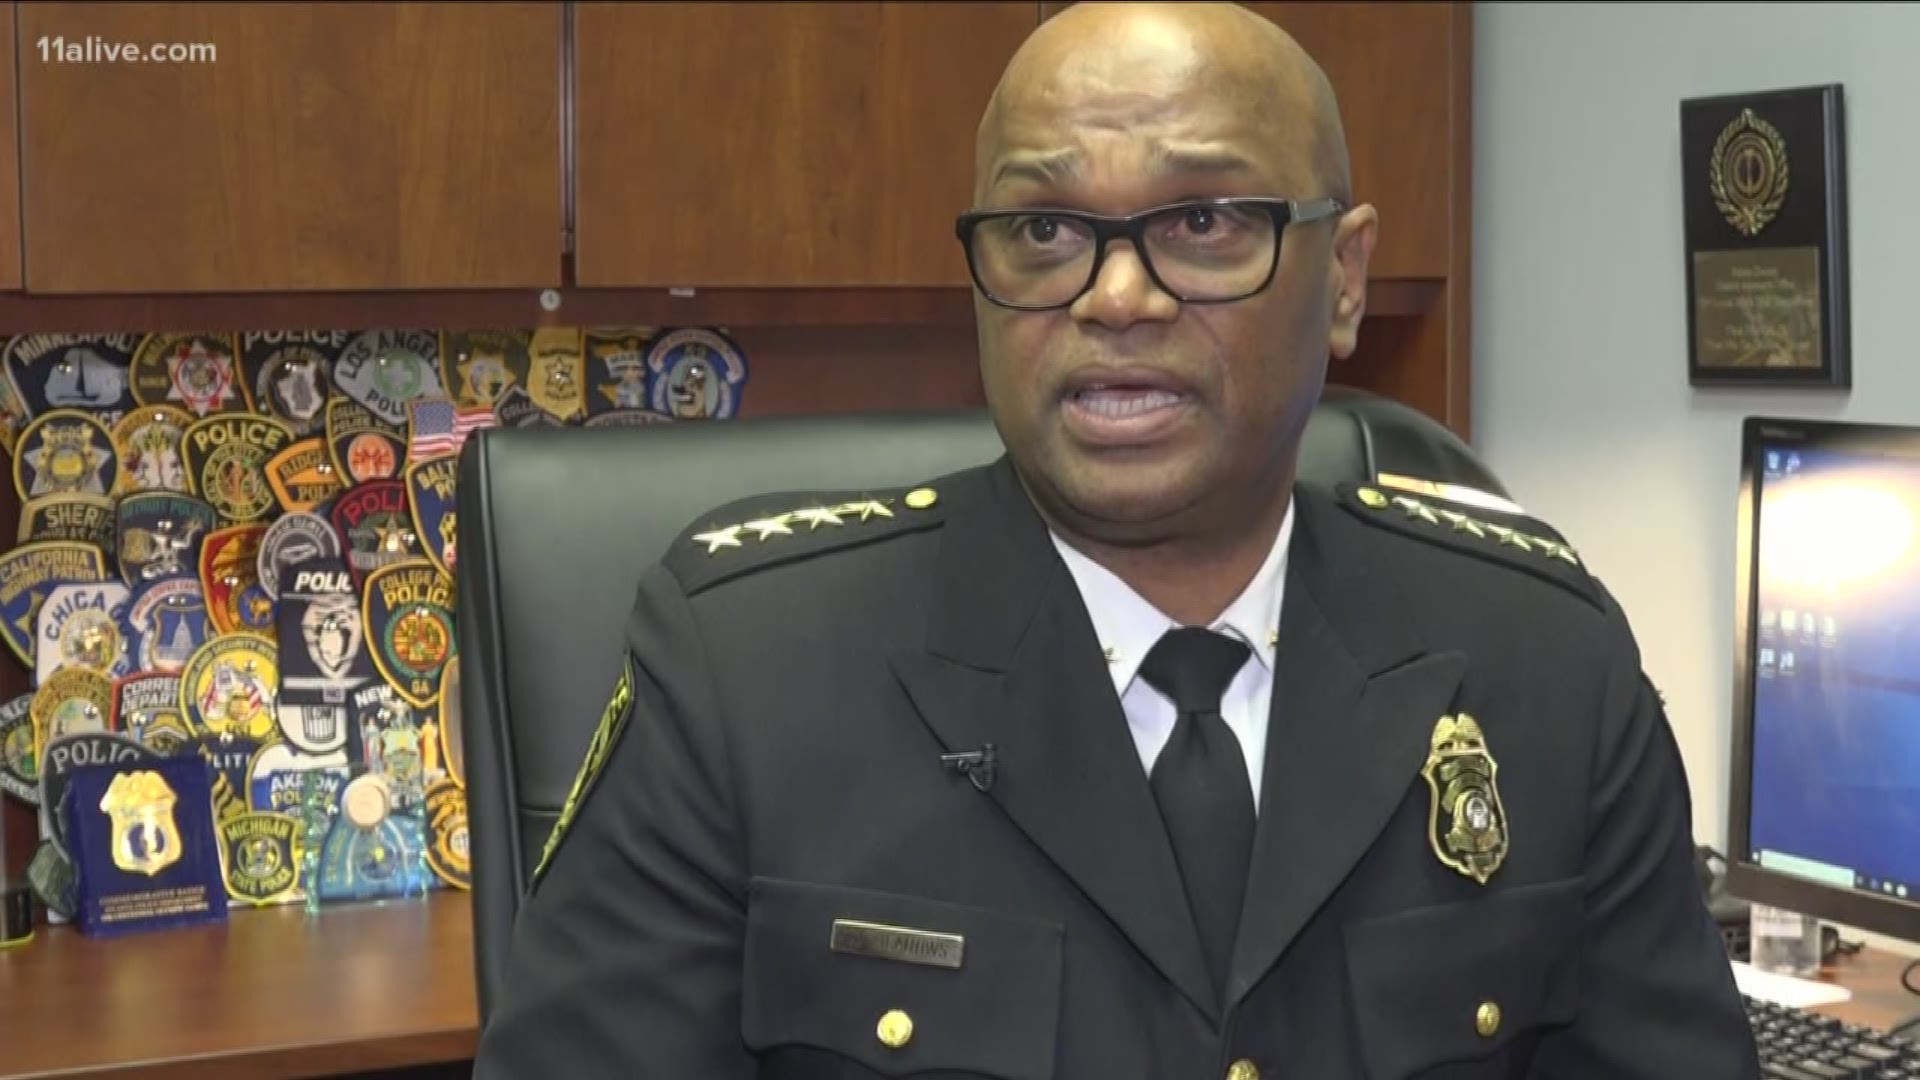 South Fulton has changed its chase policy regarding stolen vehicles after a fiery crash involving a police officer that left three dead.